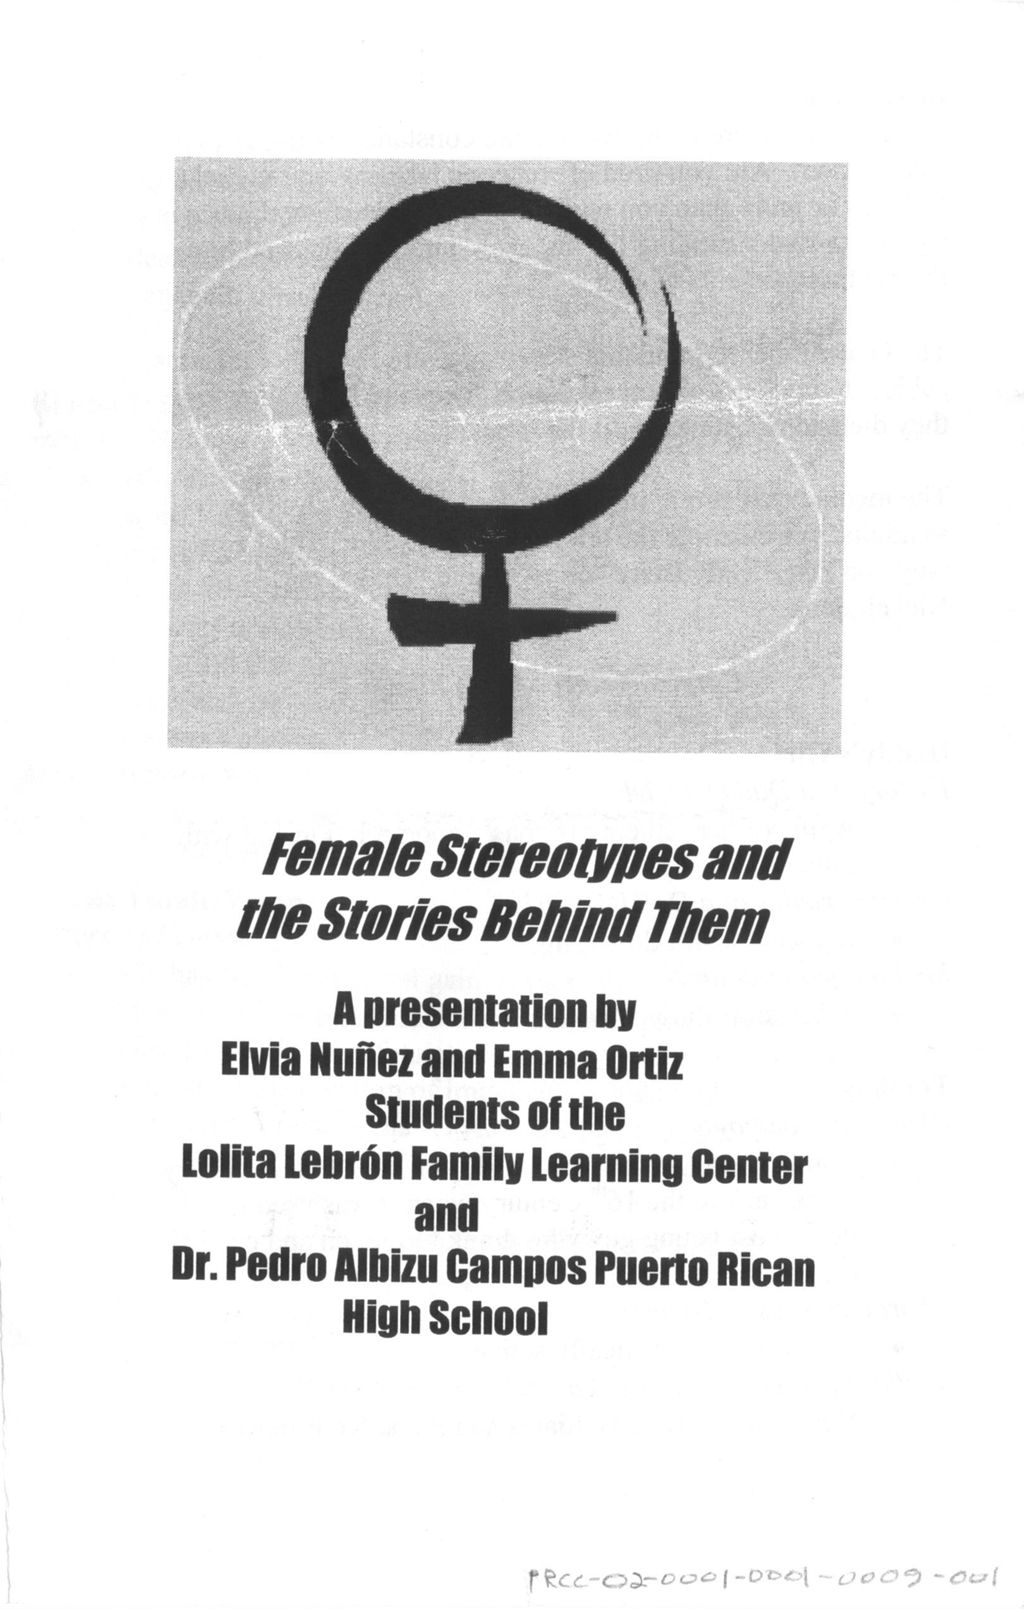 Miniature of Female Stereotypes and the Stories Behind Them: A presentation by Elvia Nuñez and Emma Ortiz